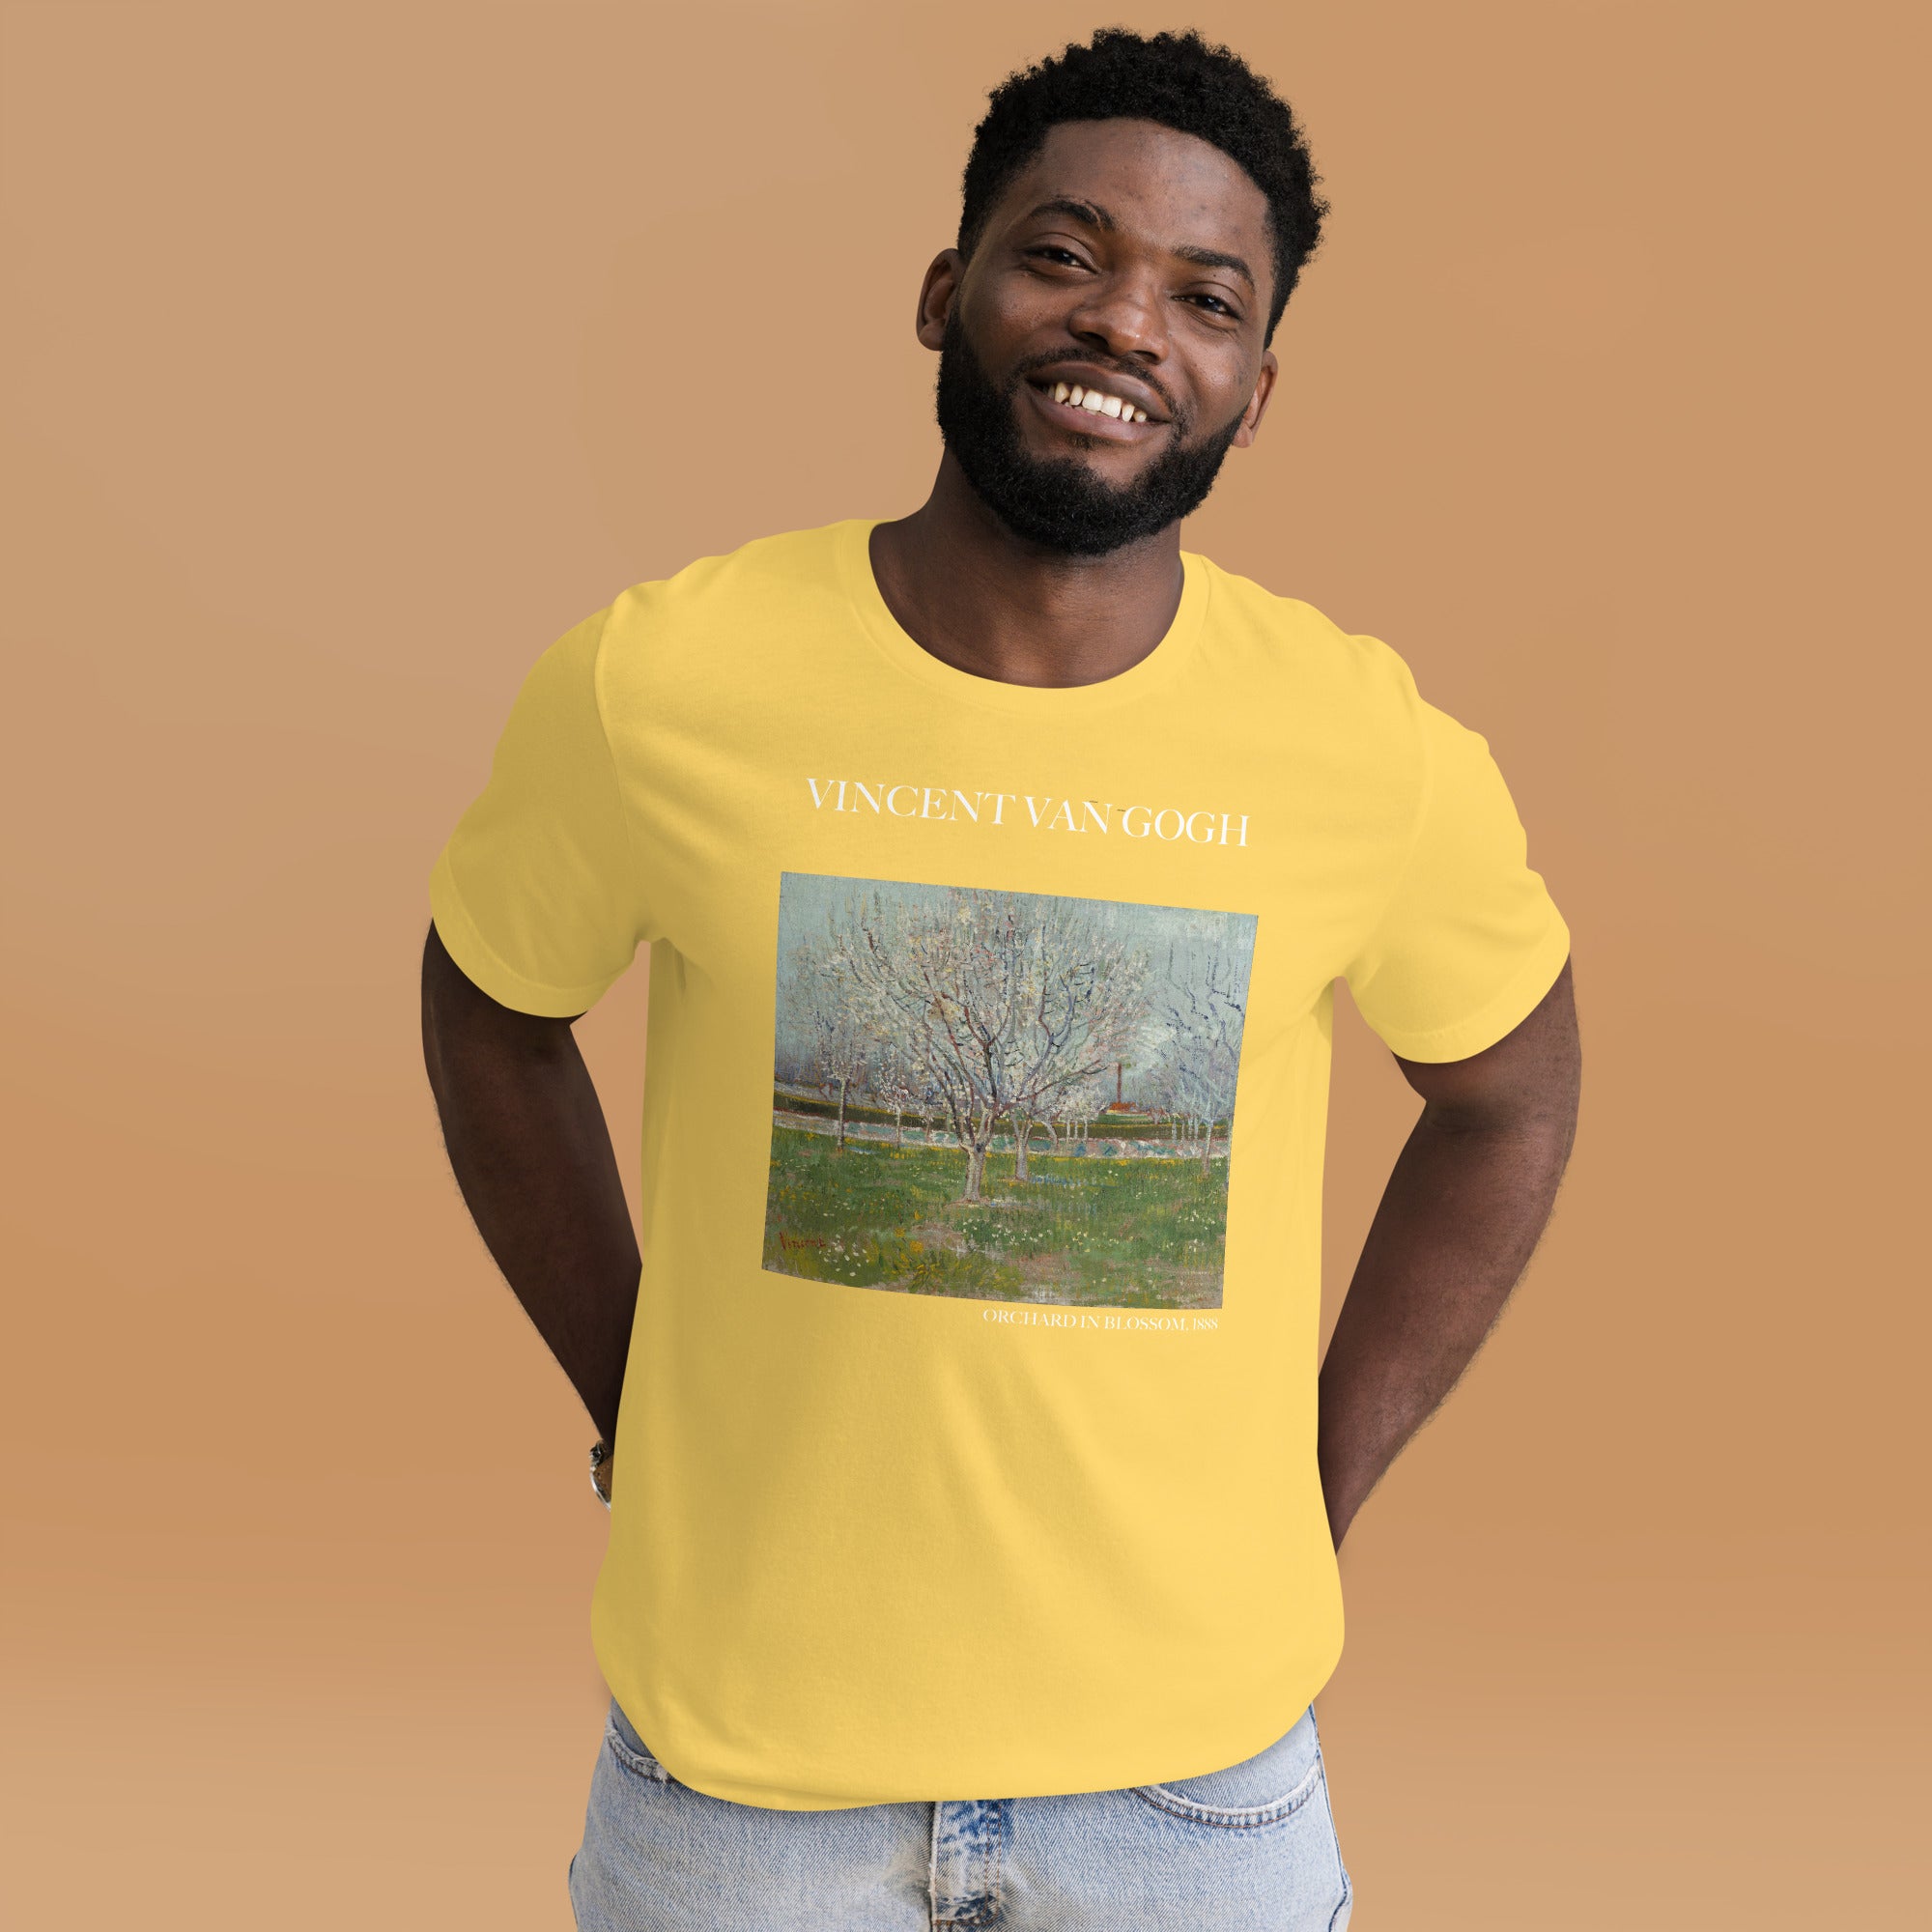 Vincent van Gogh 'Orchard in Blossom' Famous Painting T-Shirt | Unisex Classic Art Tee